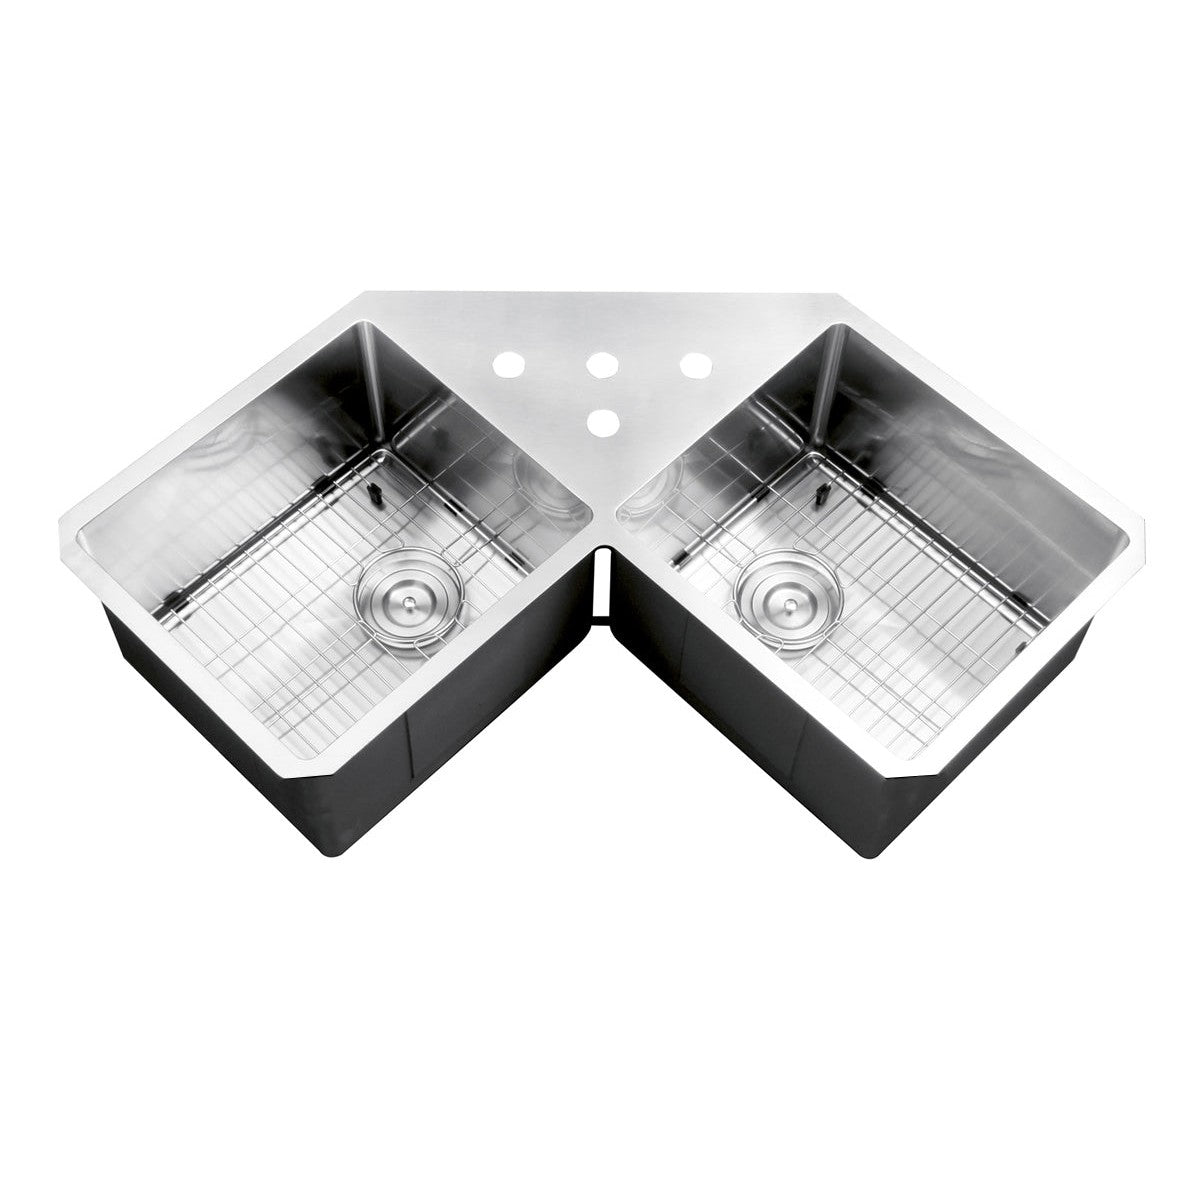 Ruvati Gravena 44” x 22" Undermount Stainless Steel 50/50 Double Bowl Corner Butterfly Kitchen Sink With Basket Strainer, Bottom Rinse Grid and Drain Assembly